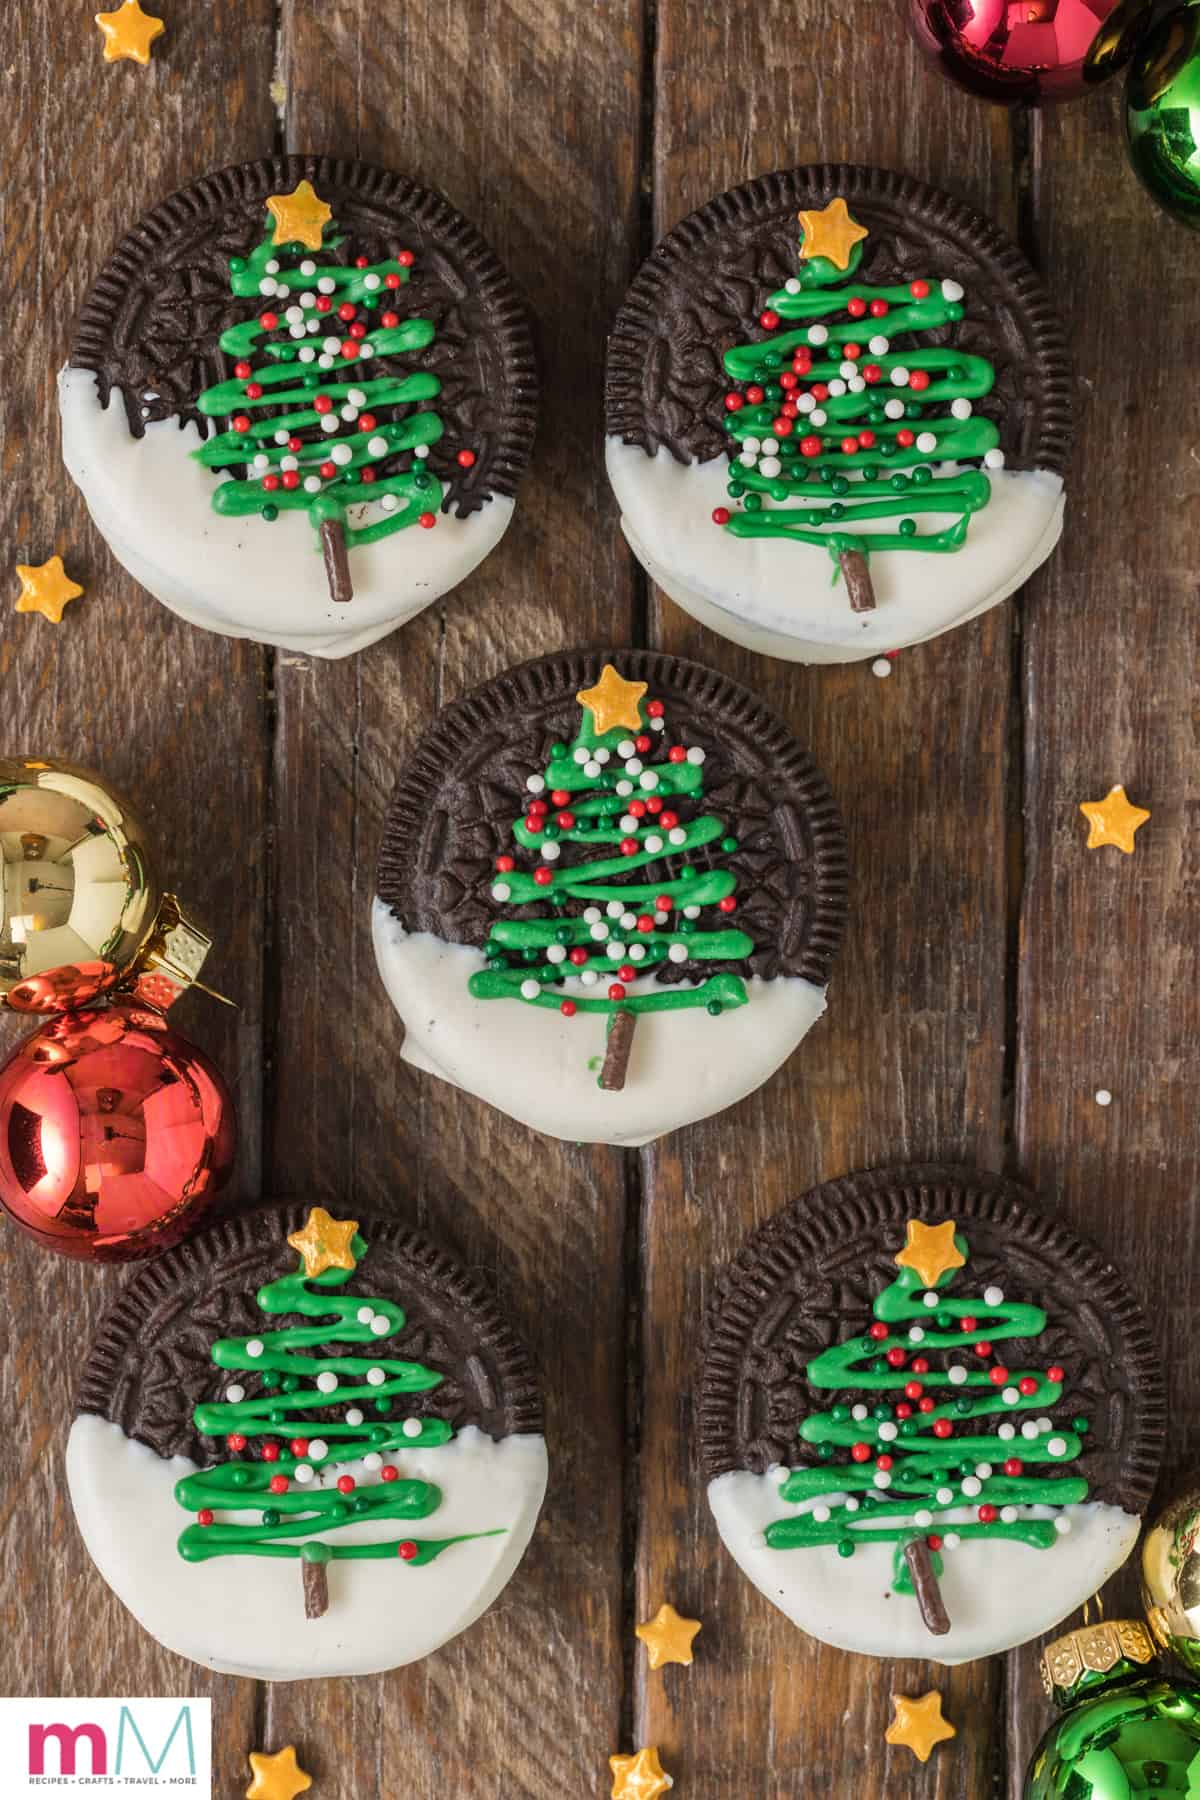 Celebrate The Holidays with this Oreo Christmas Gift Set!